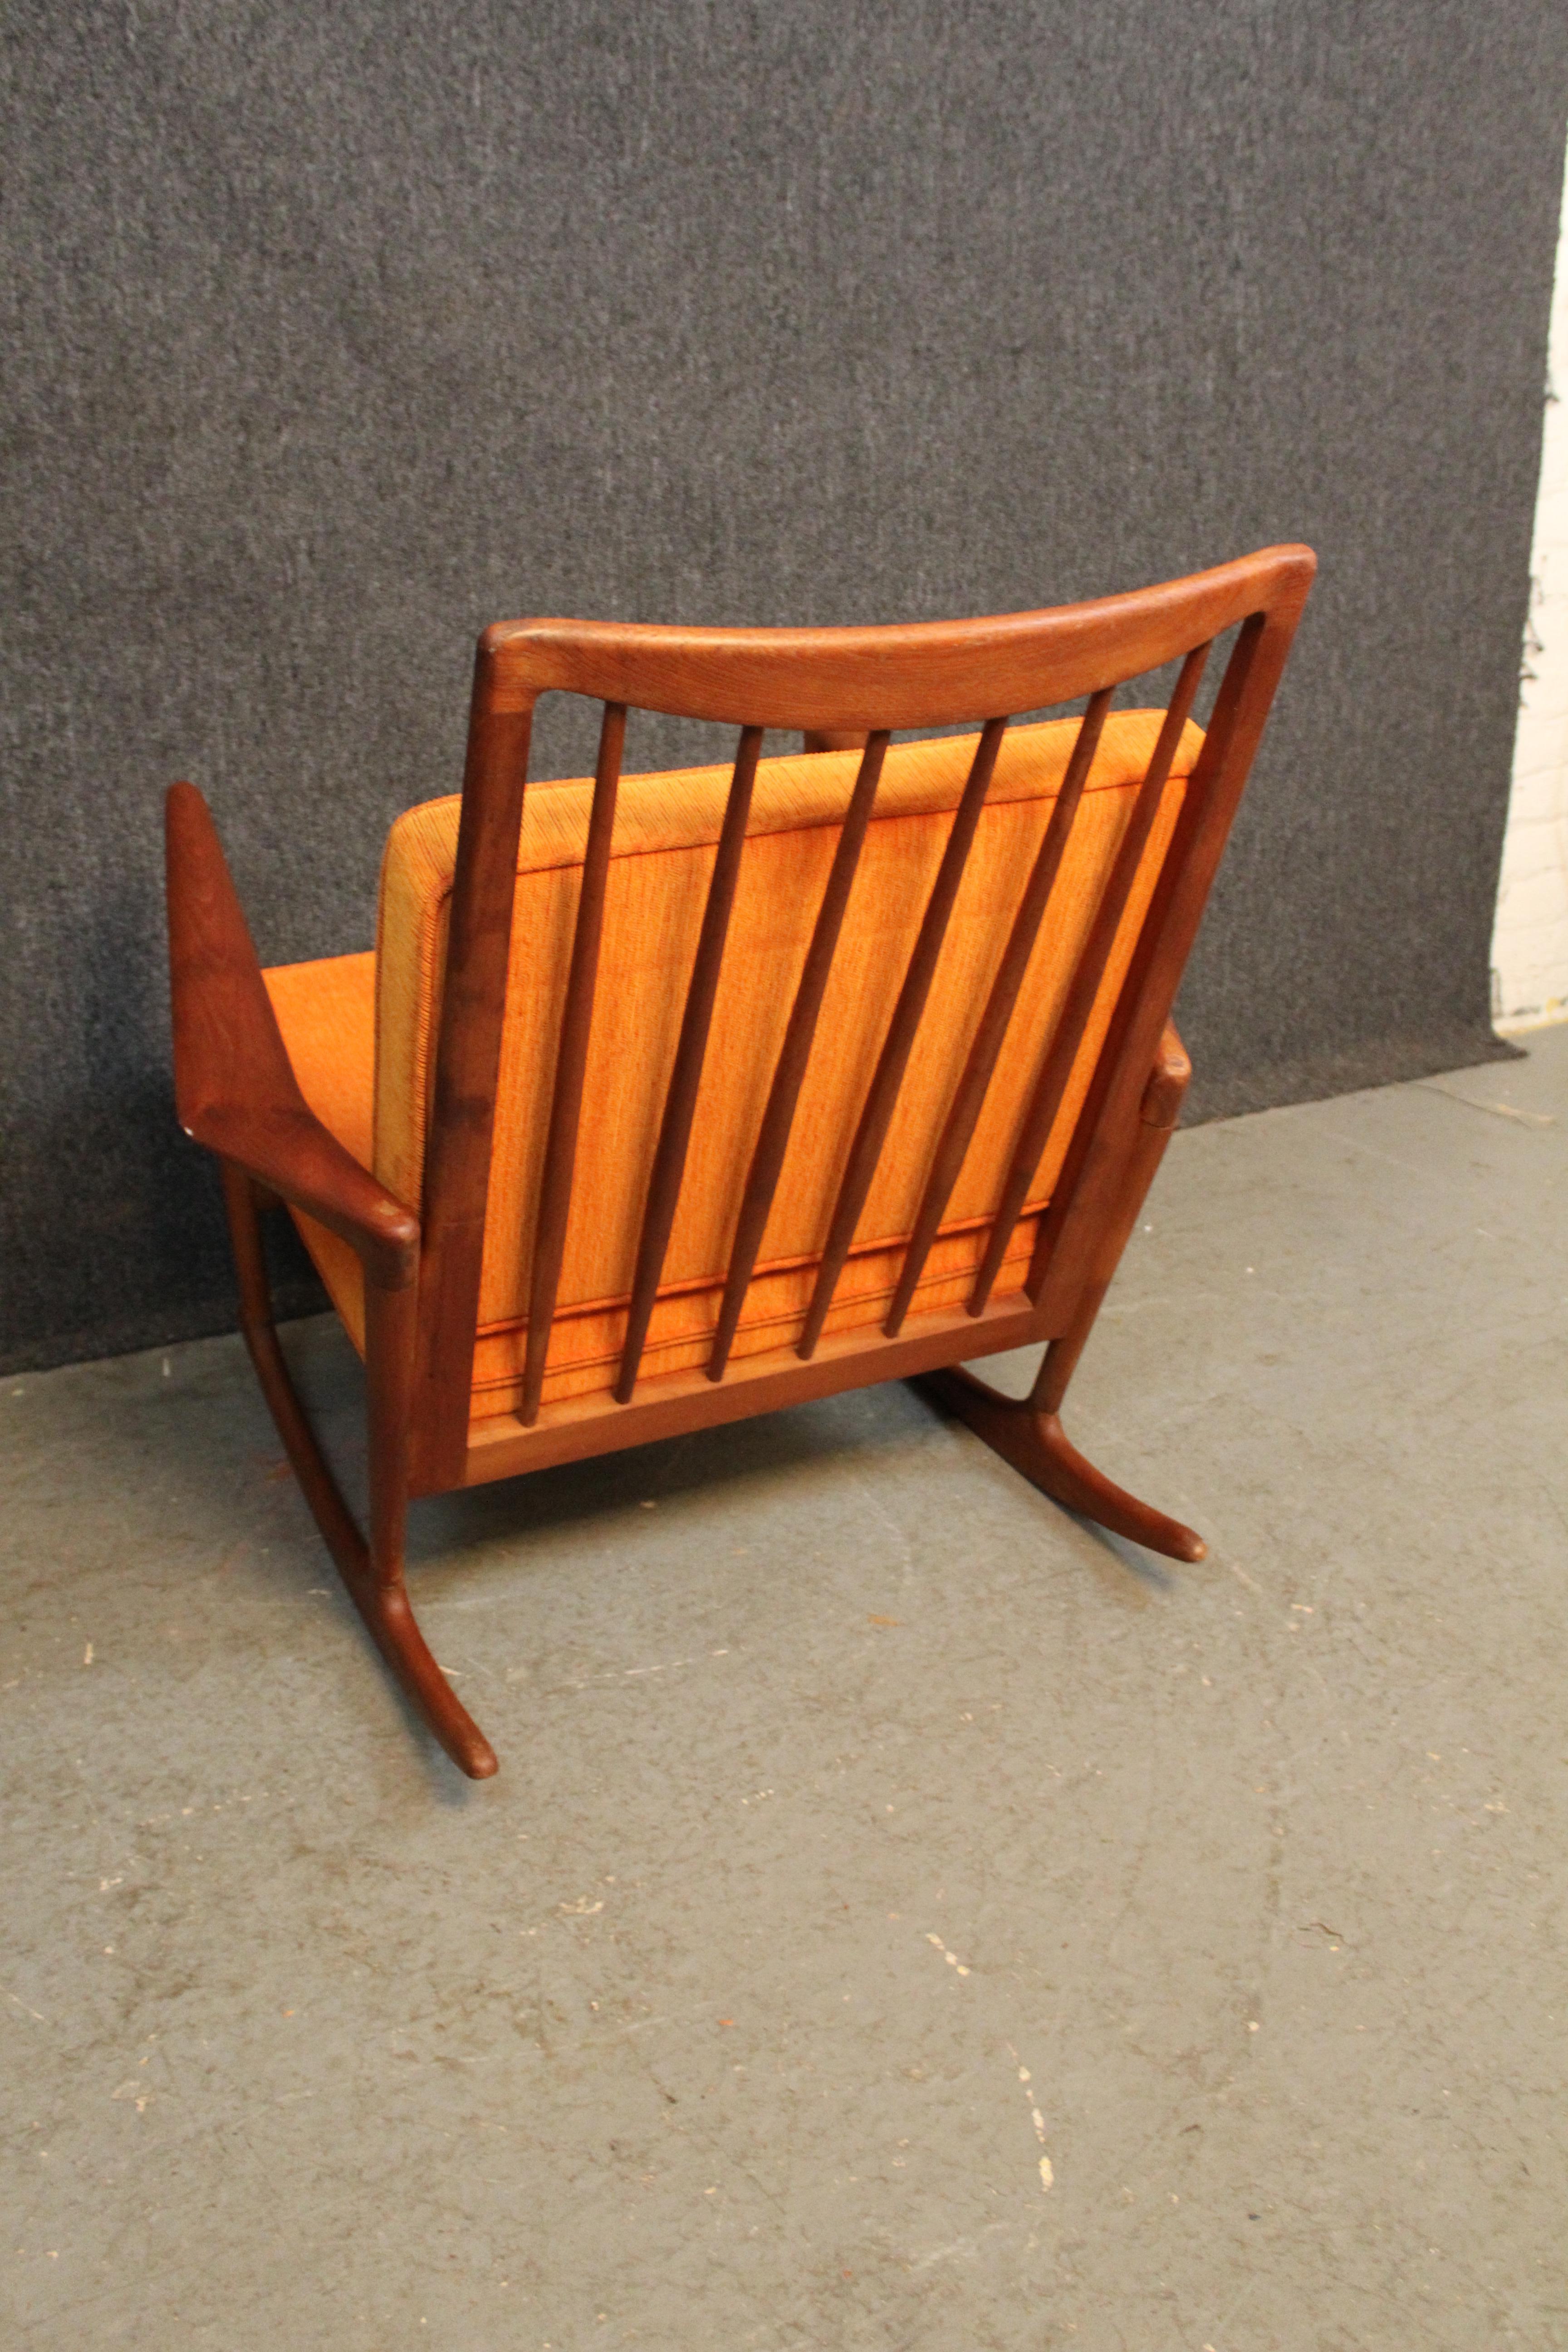 Vintage Sculptural Rocking Chair by Ib Kofod-Larsen for Selig Denmark In Good Condition For Sale In Brooklyn, NY